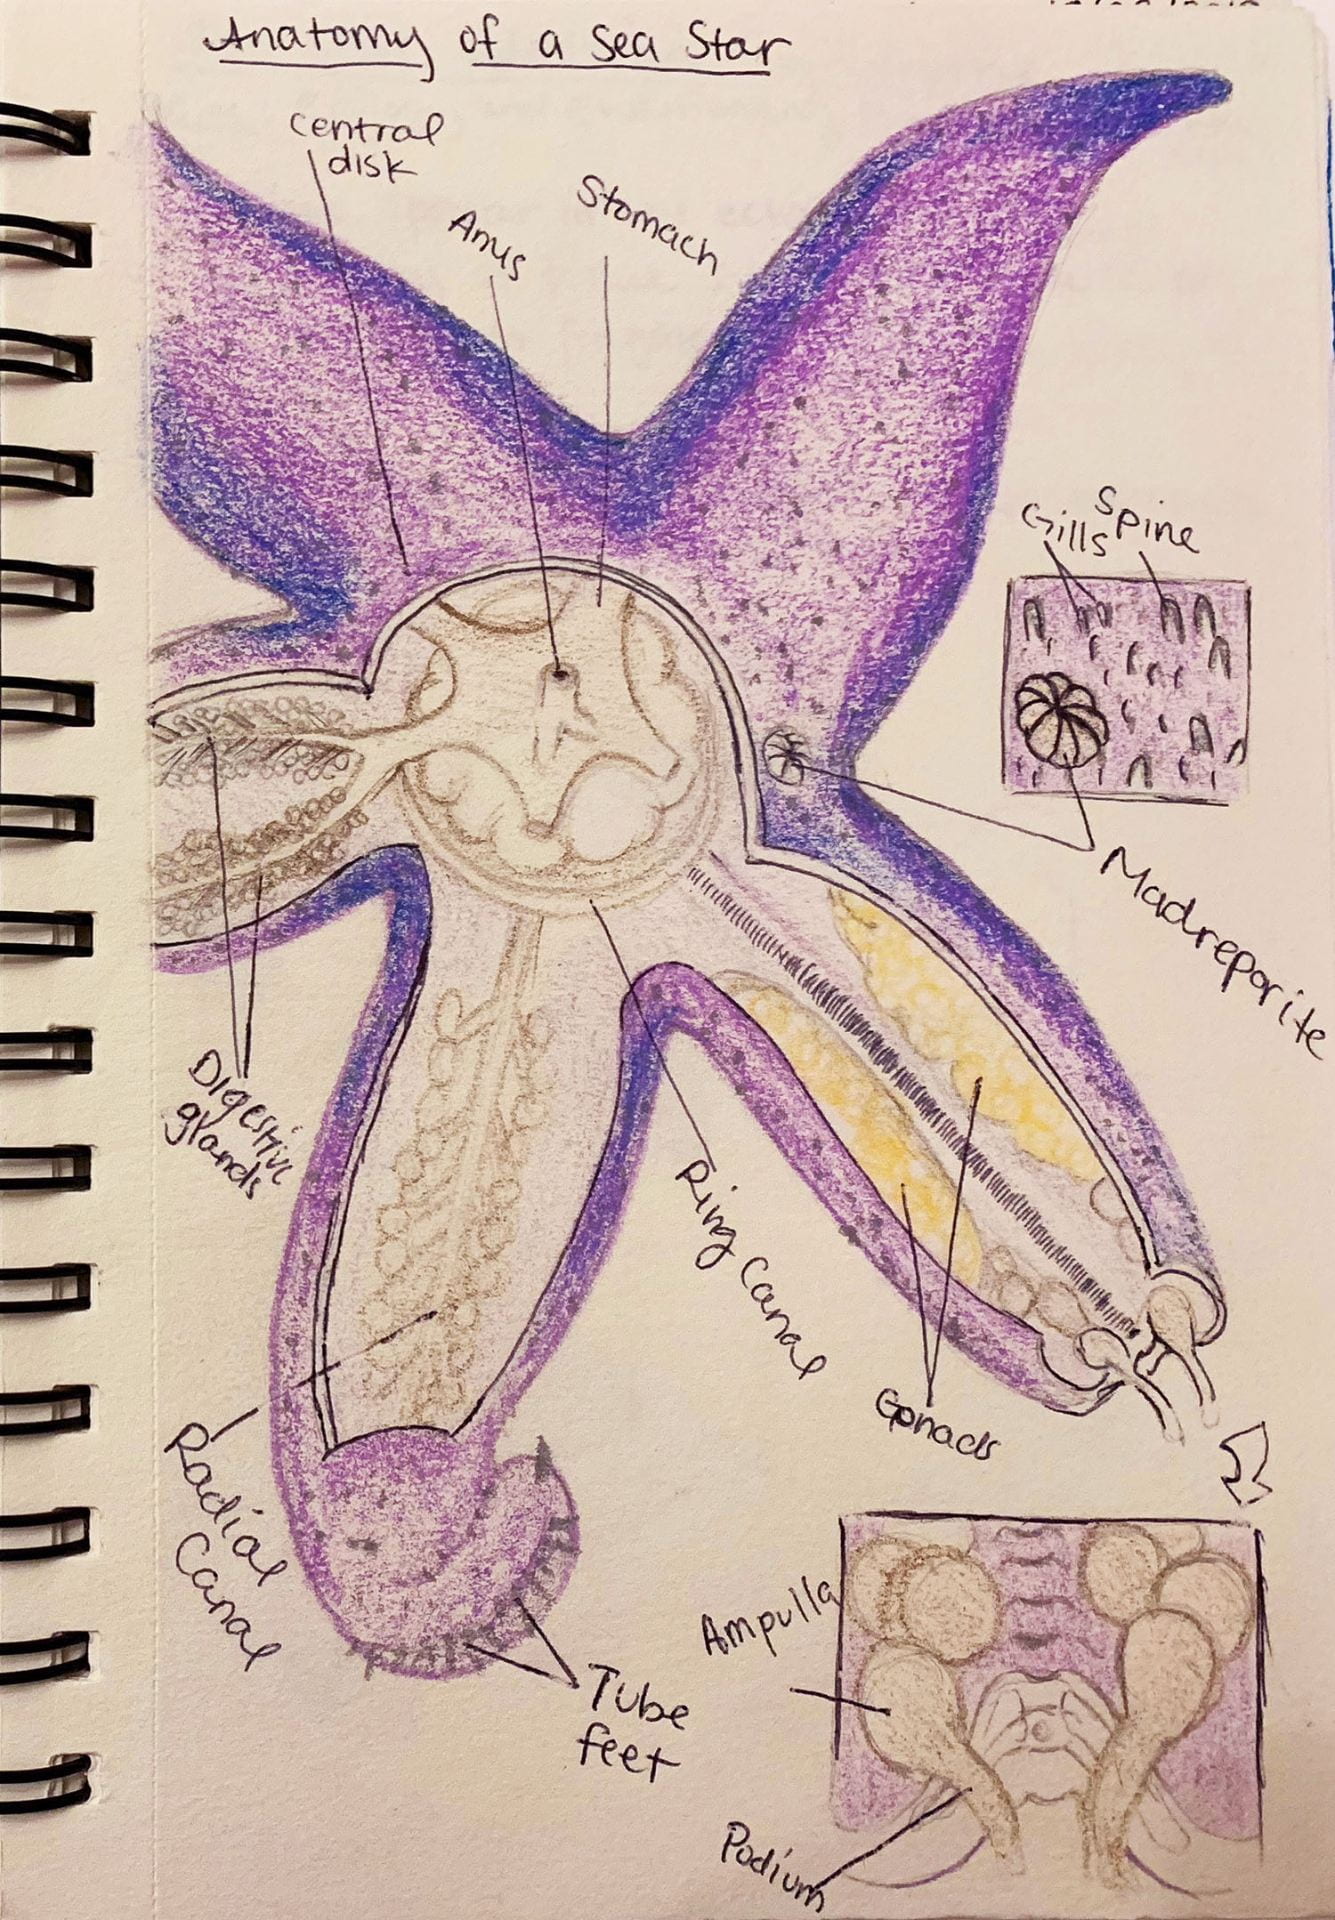 colored pencil illustration with notes about the anatomy of a sea star